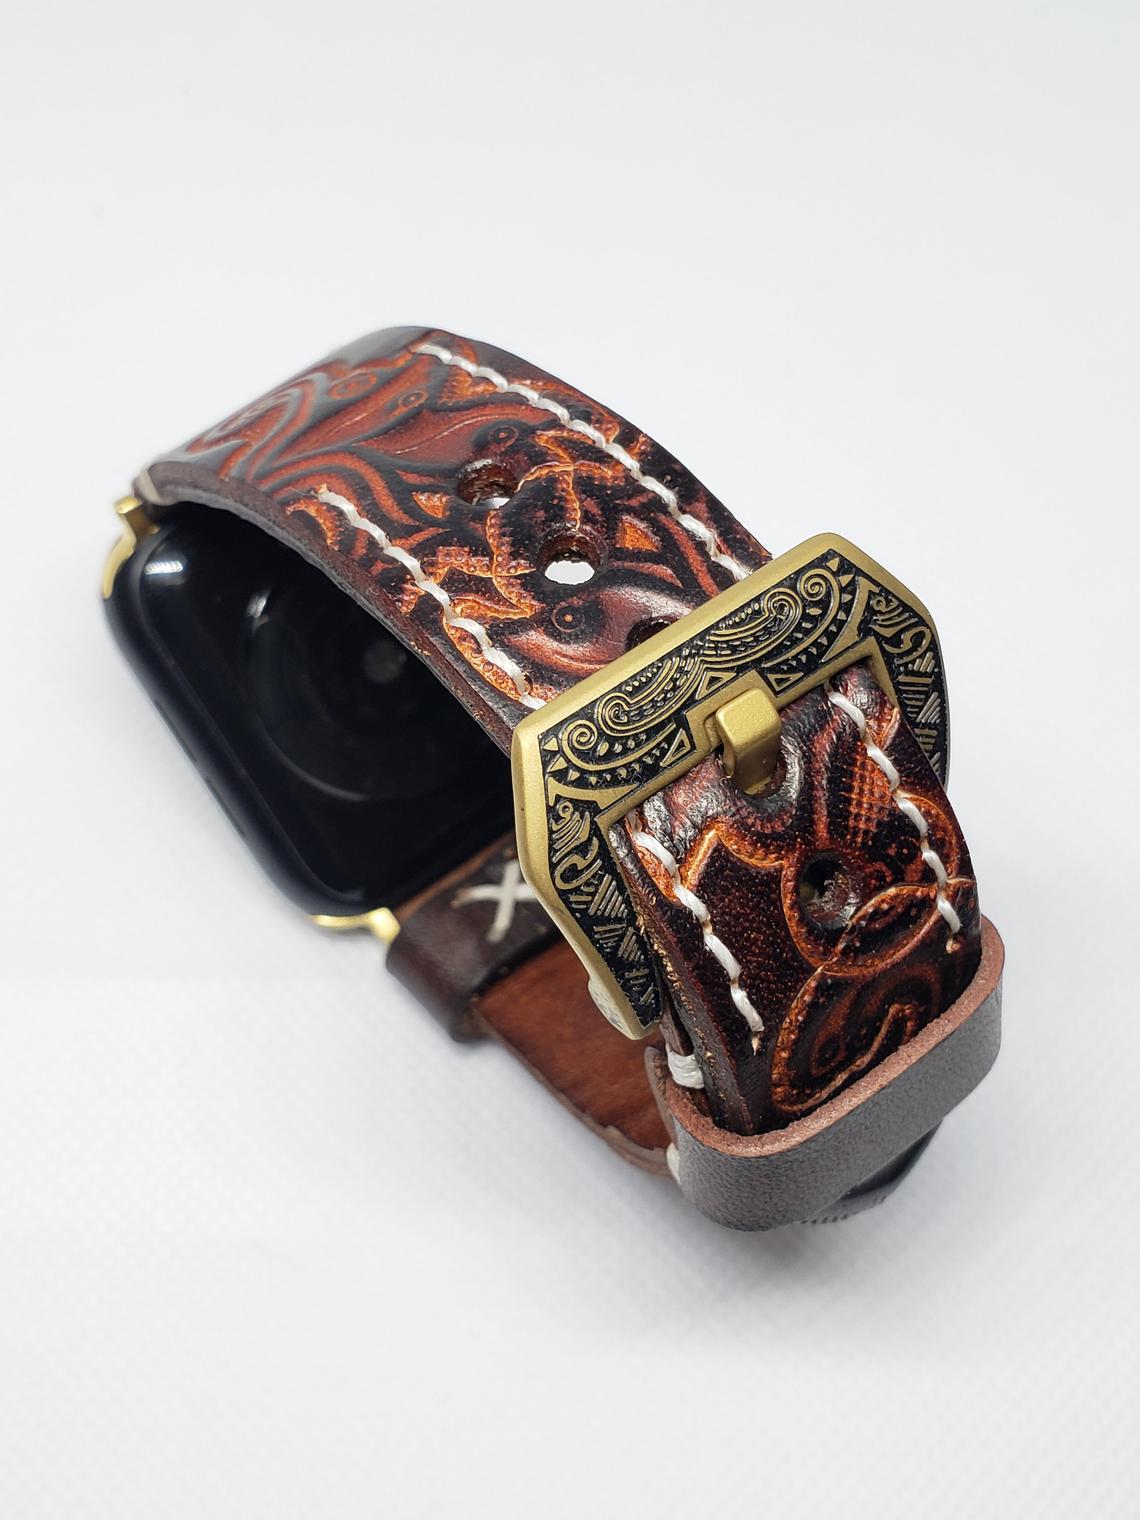 Vintage Handmade Tooled Genuine Leather Watch Band For All Wrist Watches